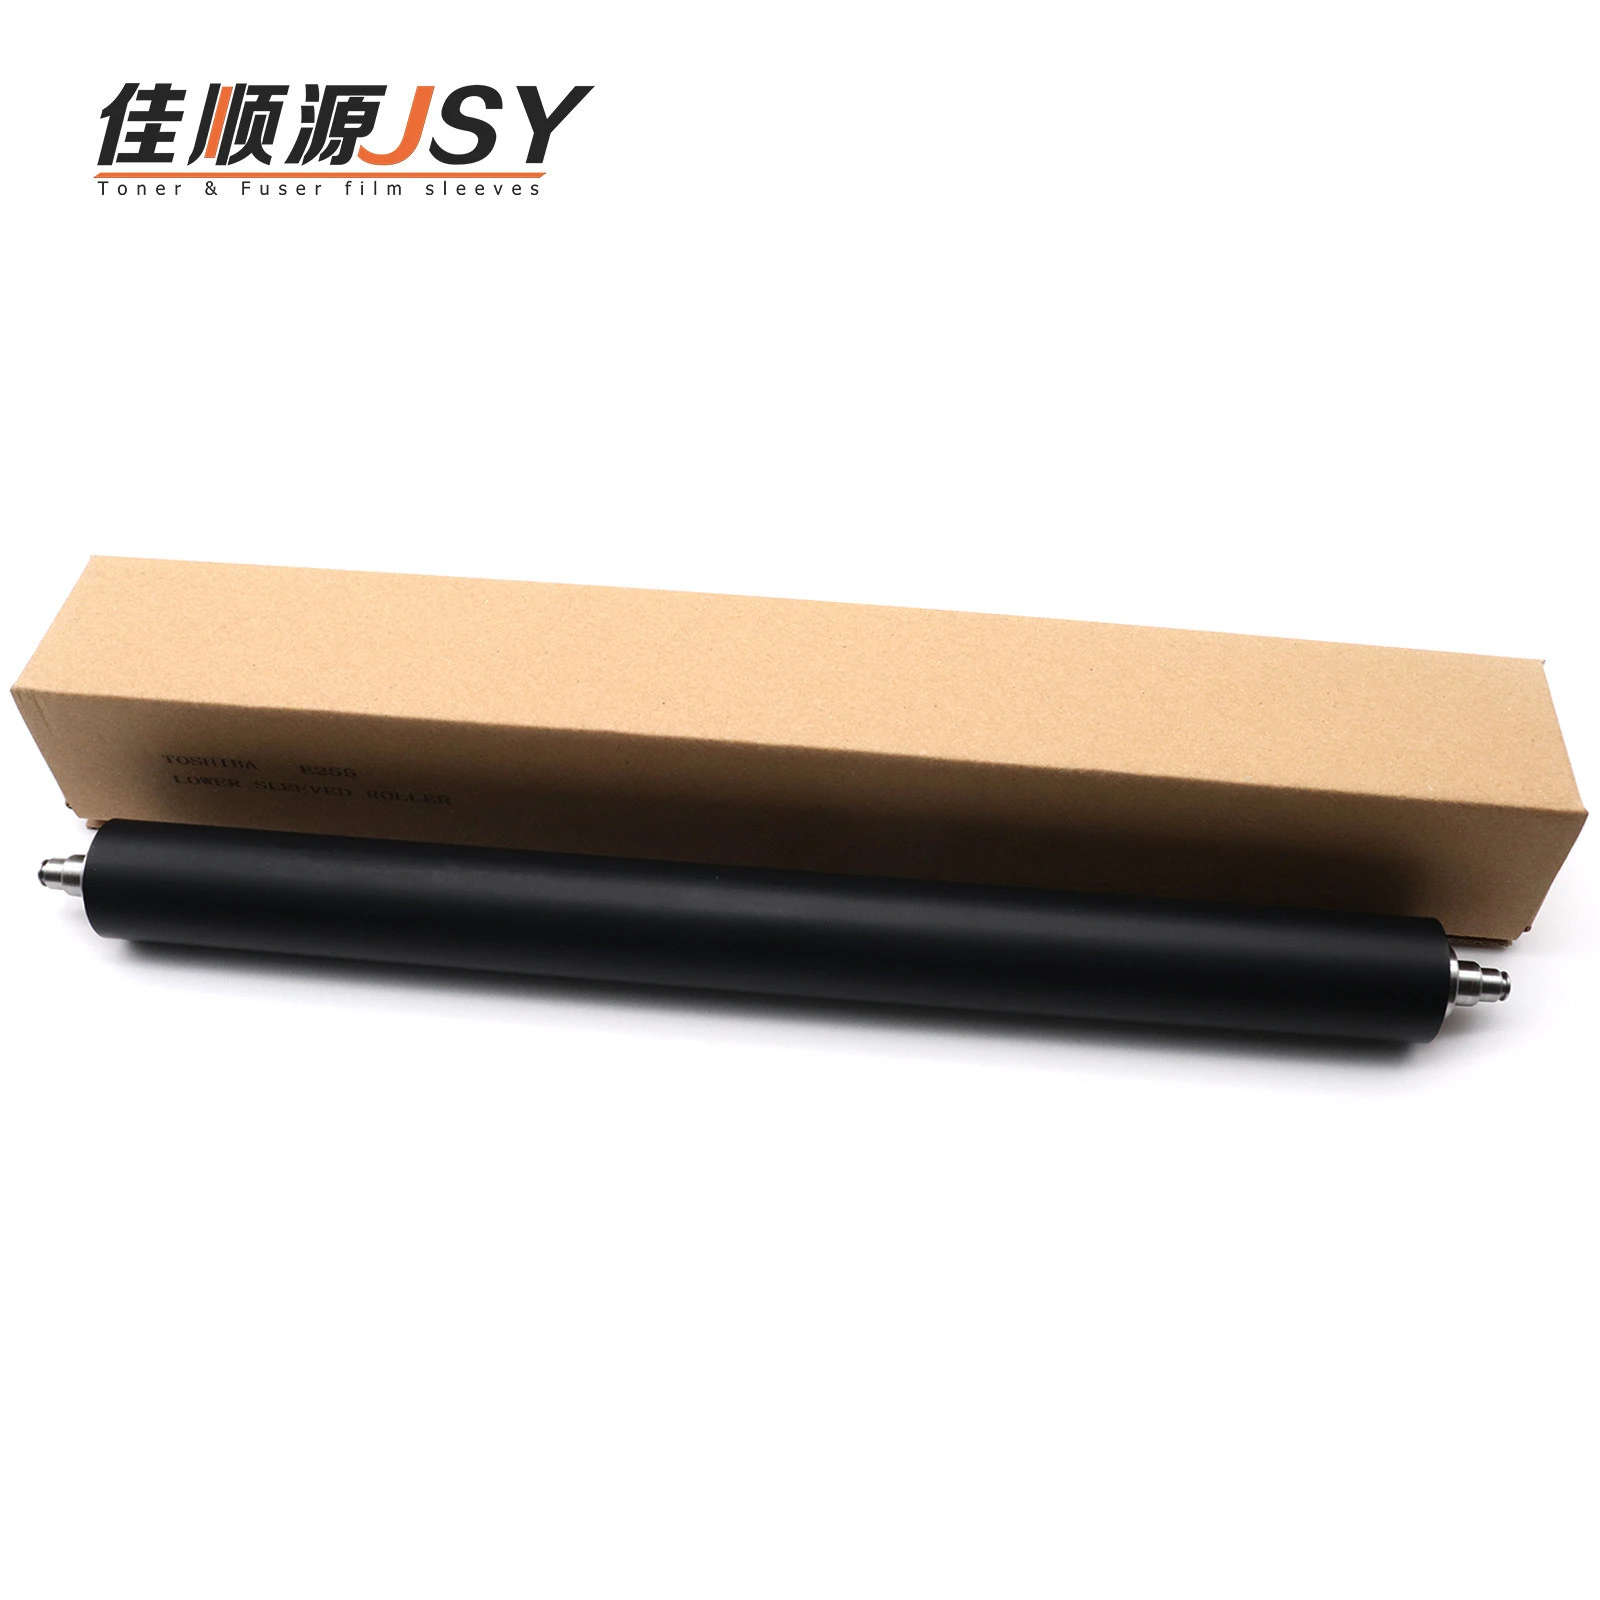 Lower Fuser Roller For Use In Toshibas E STUDIO 255/256/257/305/306/307